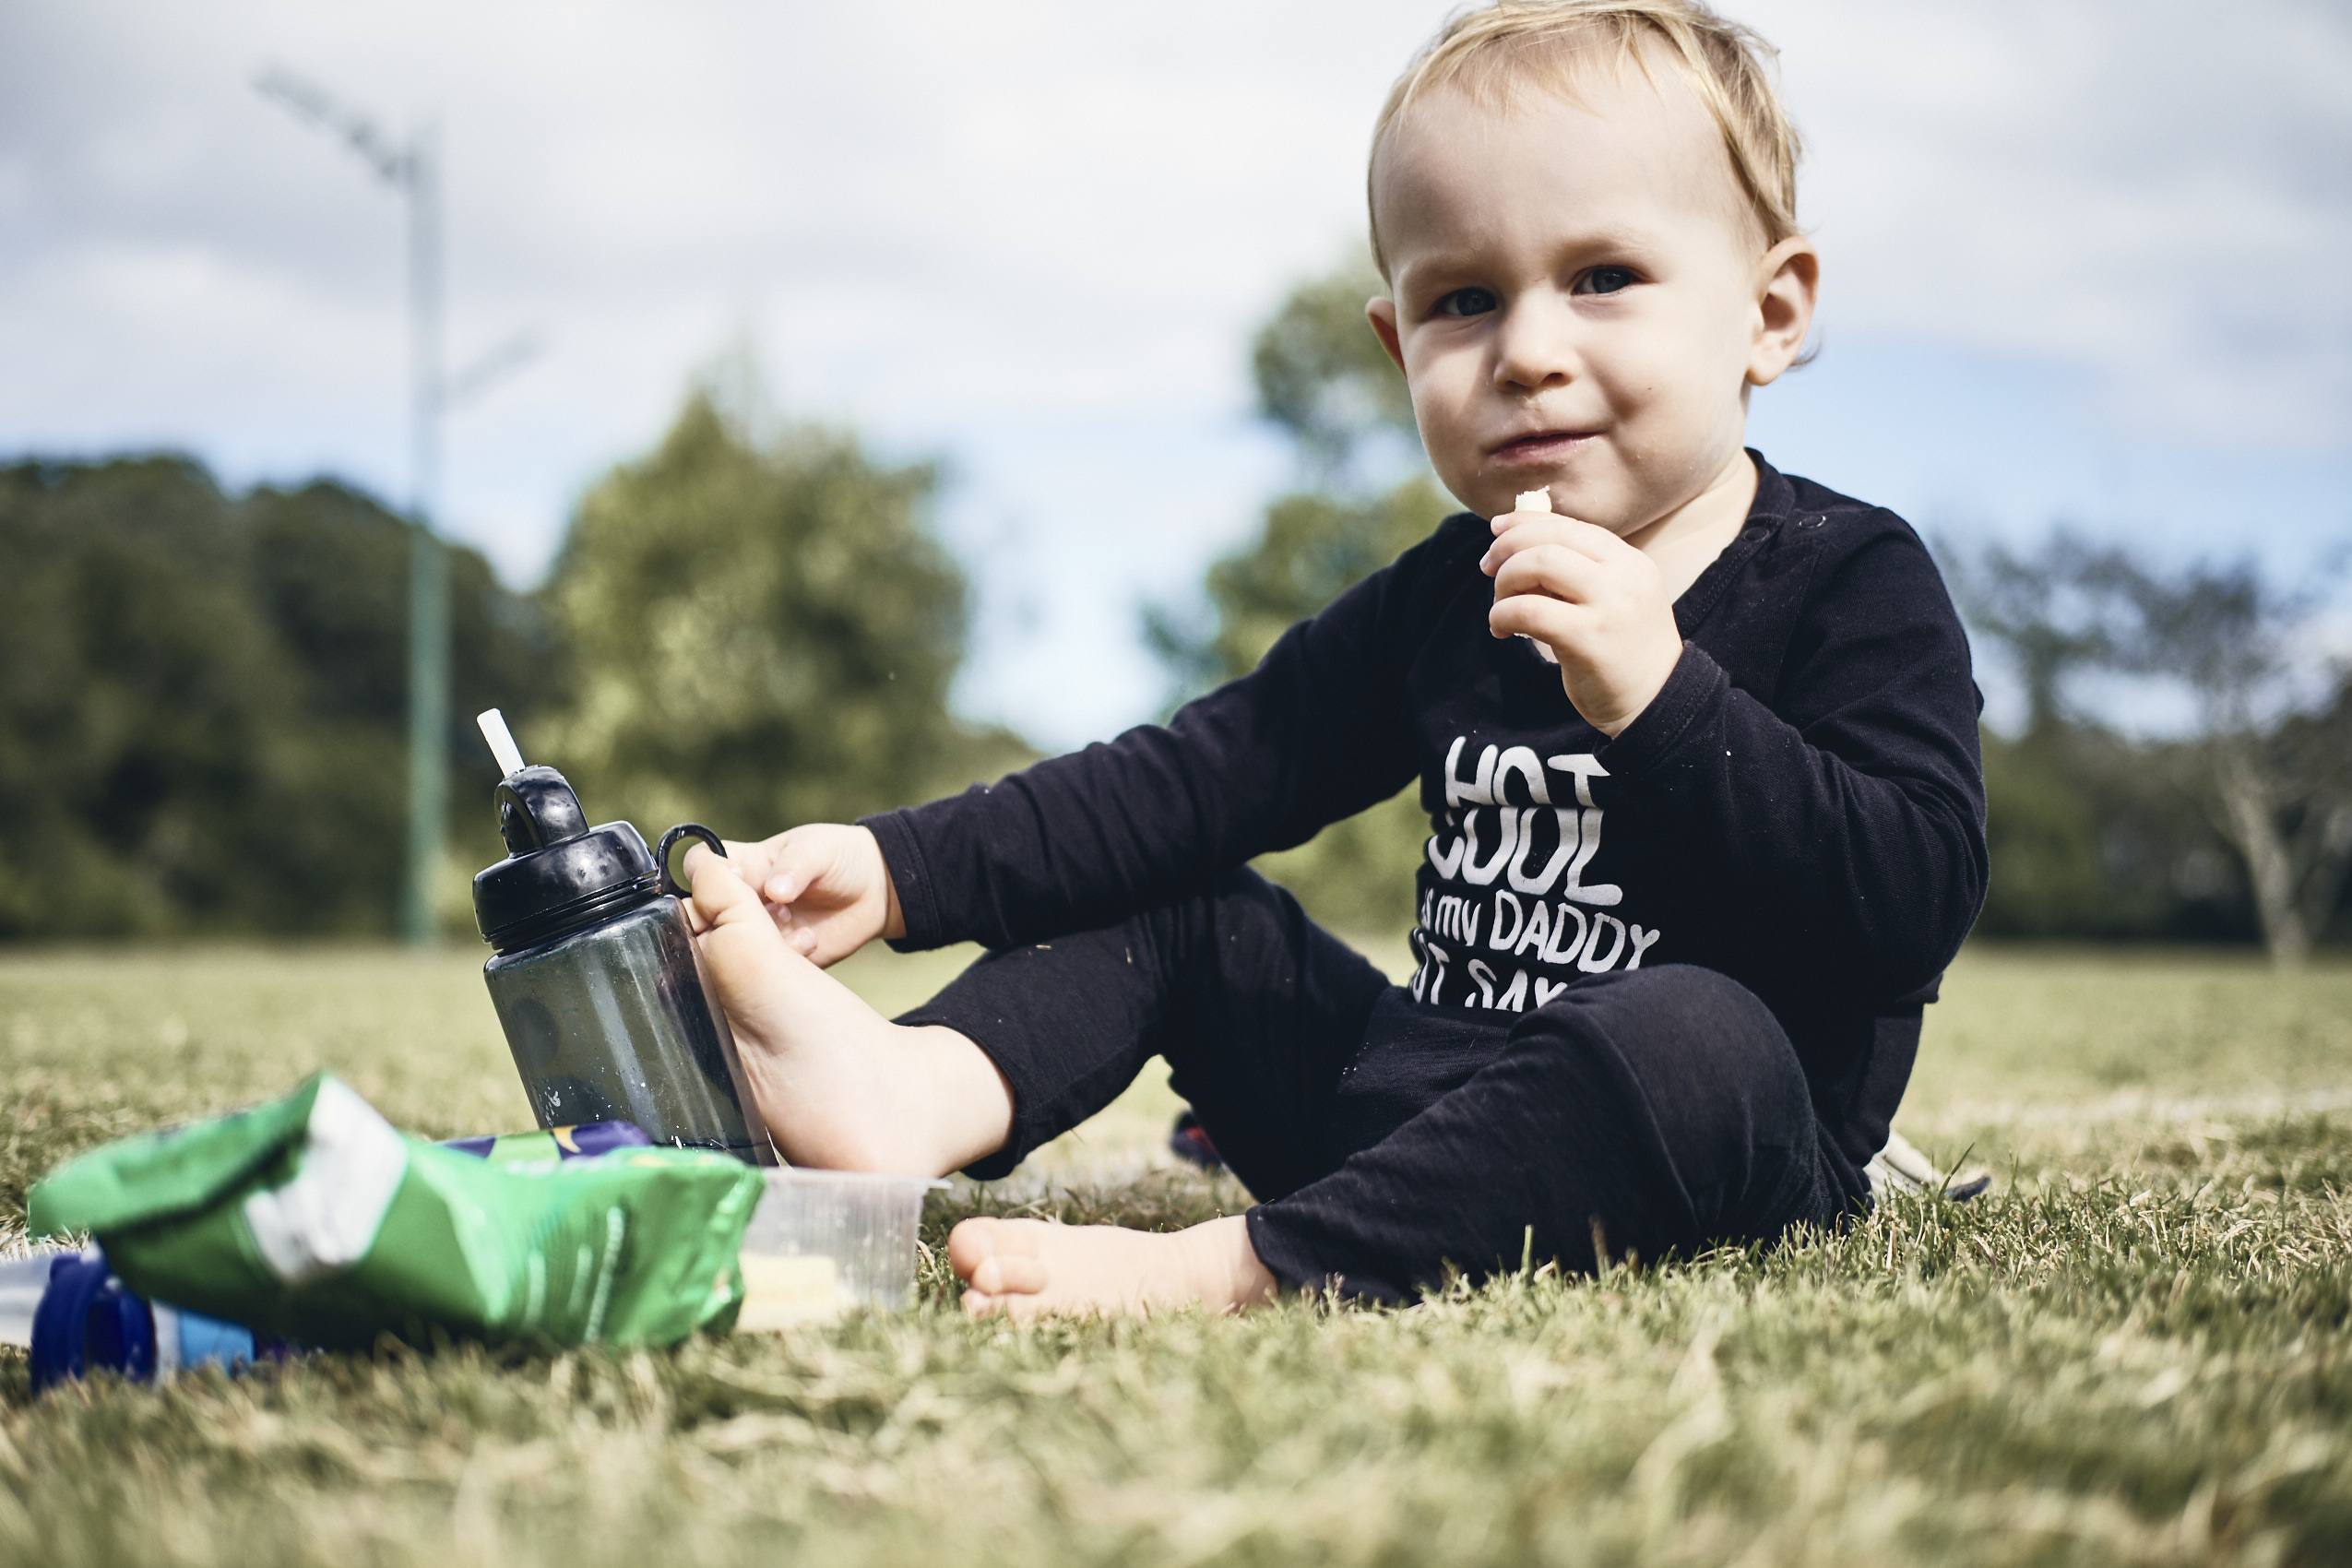 Lockdown • Toddler Sitting Down Snacking in Park  • Lifestyle & Portrait Photography